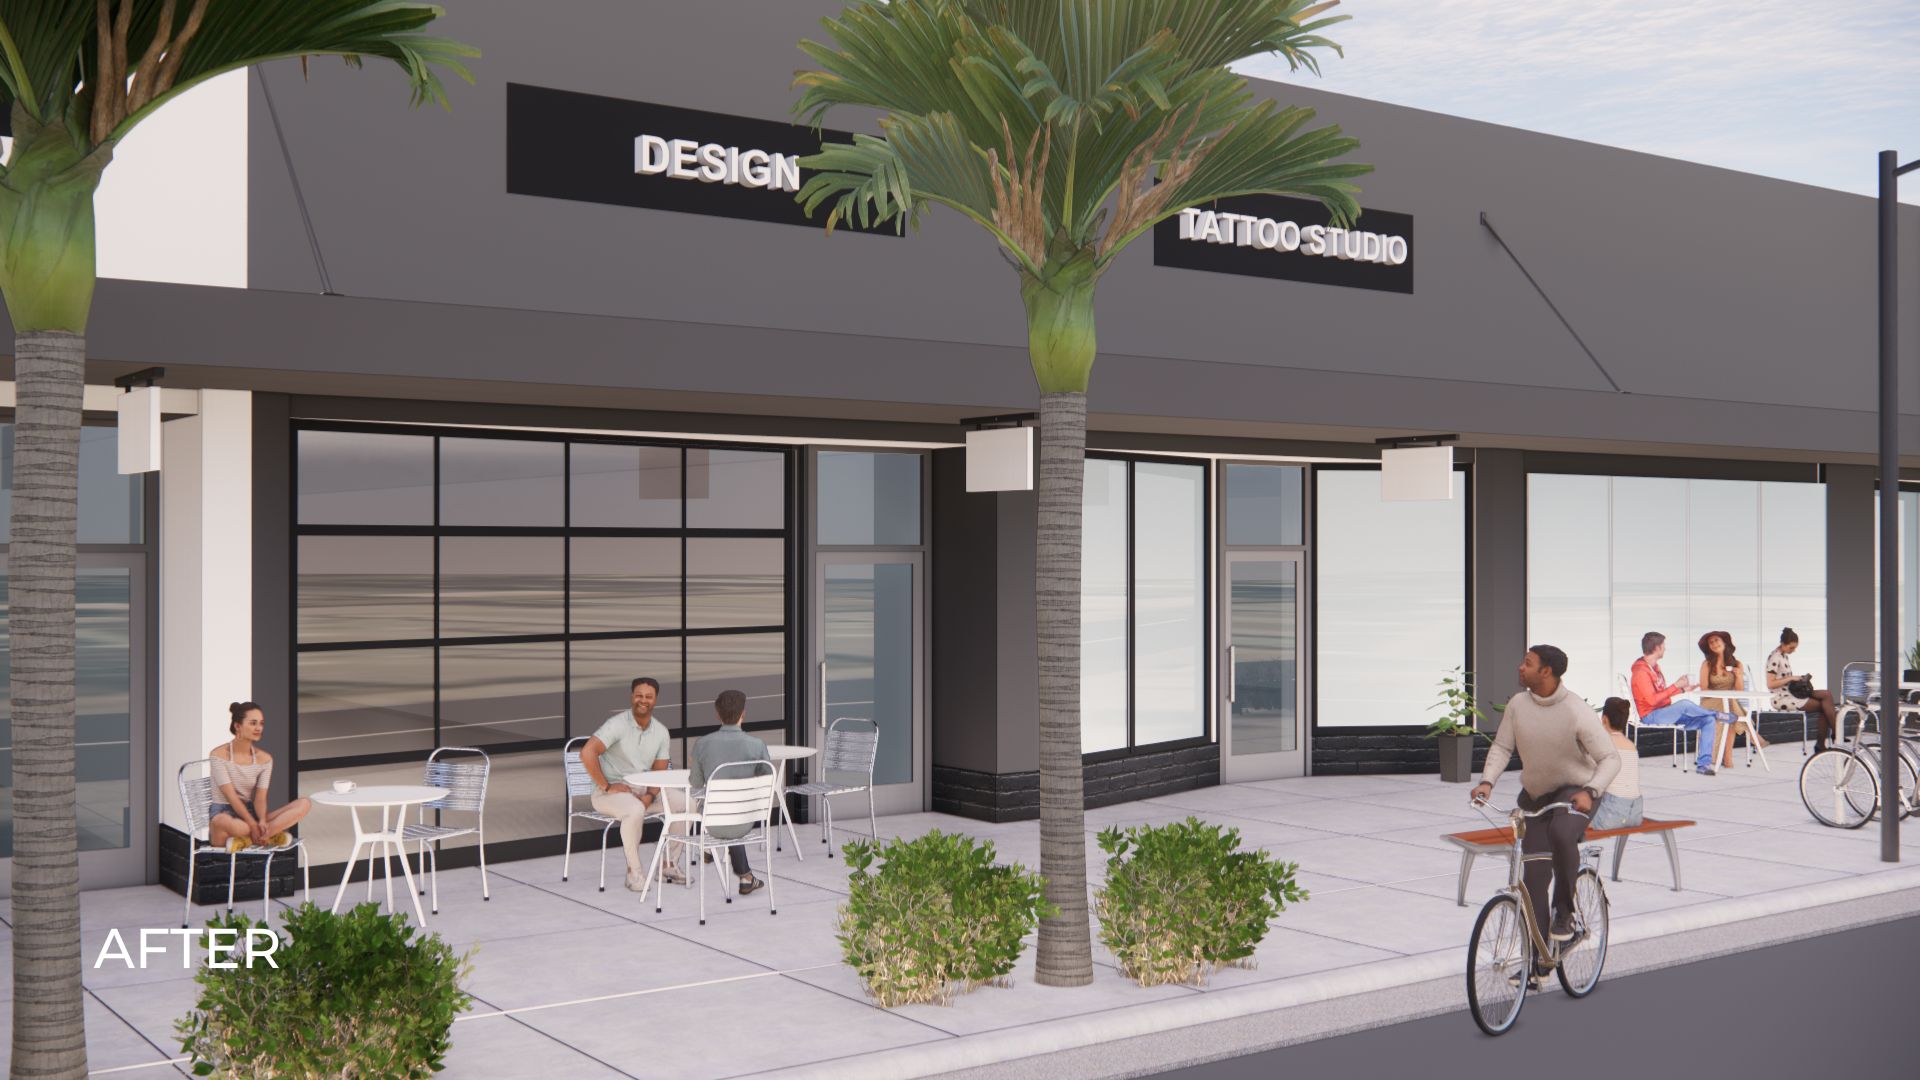 exterior rendering building storefront design with signage, plants, people, tables, outdoors